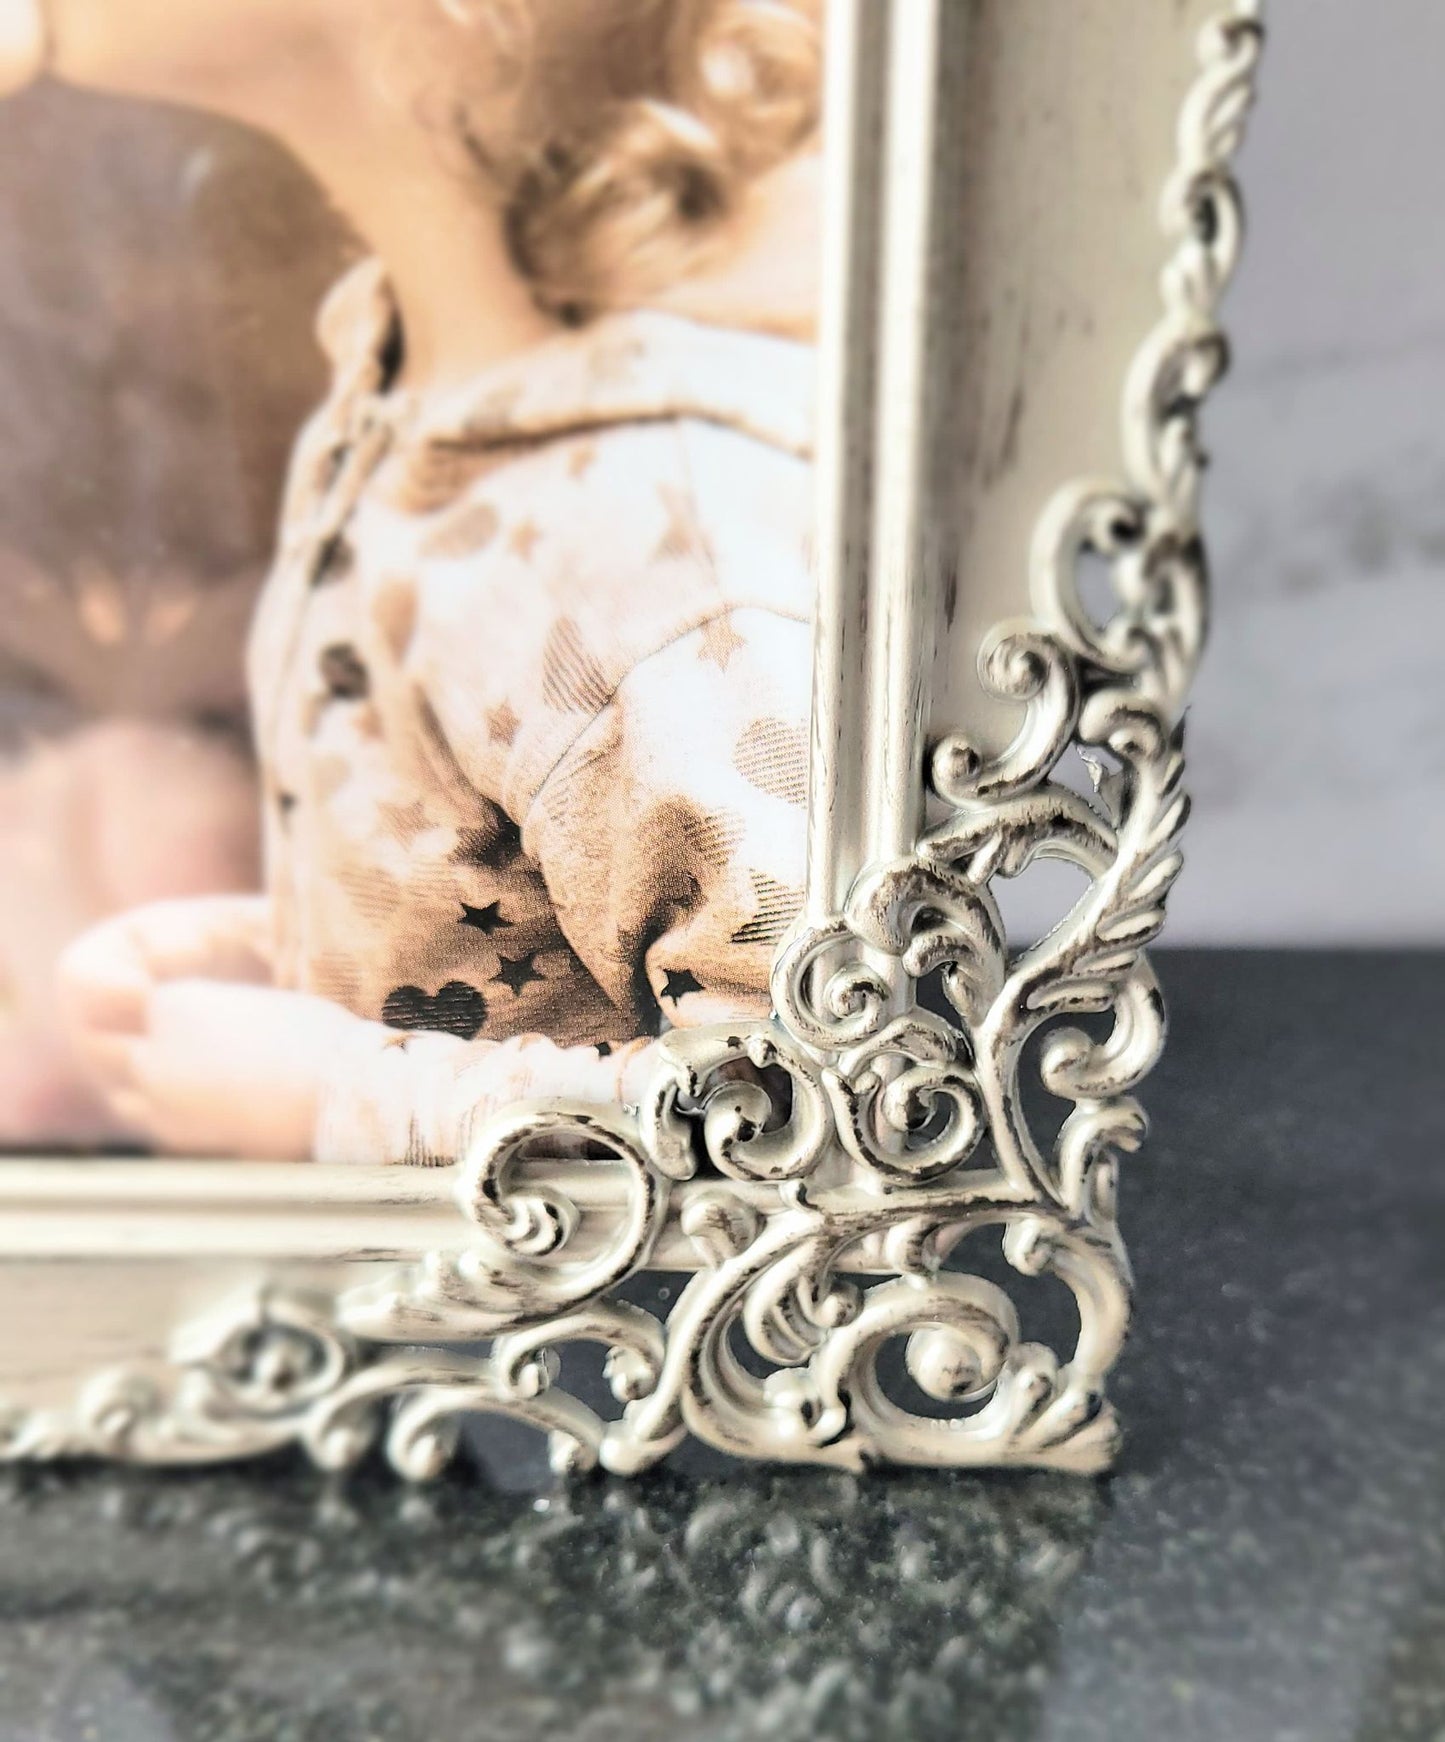 Copy of Photo Frame.  Rustic Steel Lace 5x7" photo size